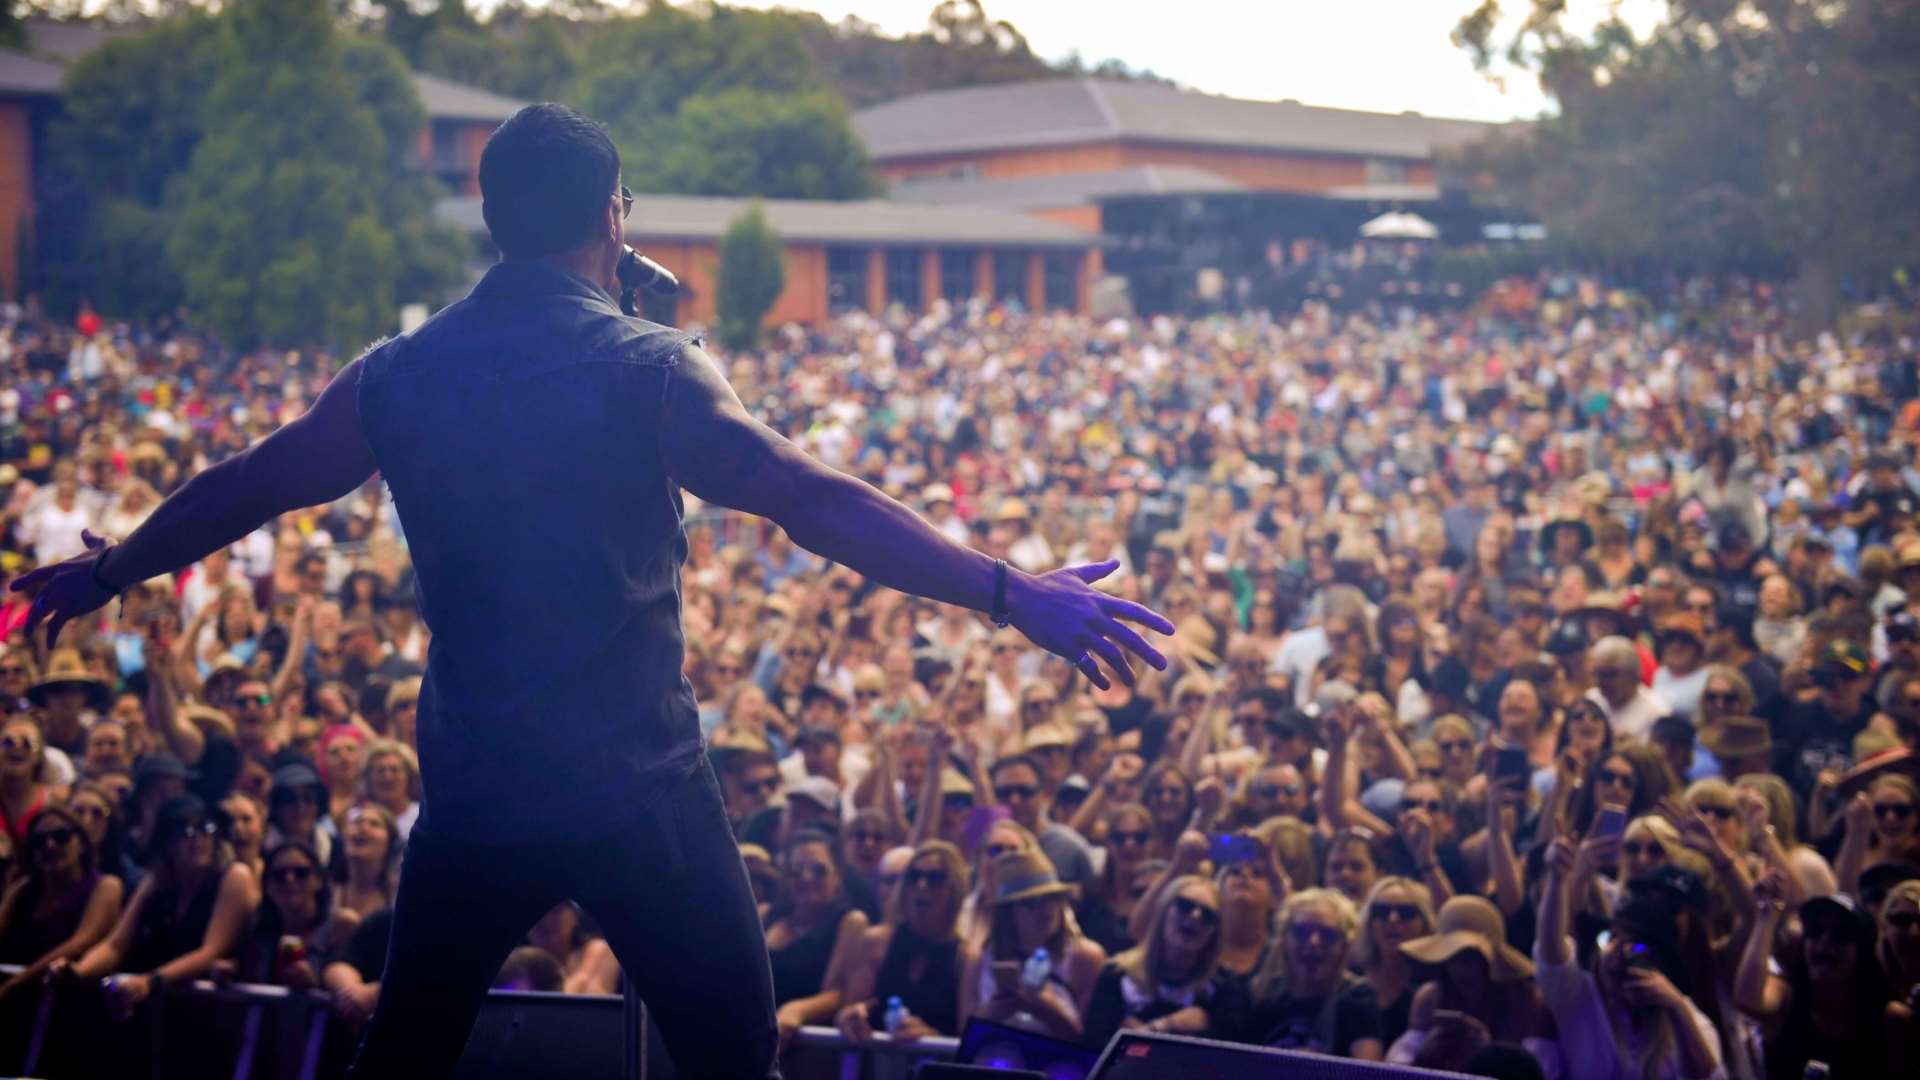 Photo taken from behind Rock singer Shannon Noll who is on stage performing to thousands of concert goers